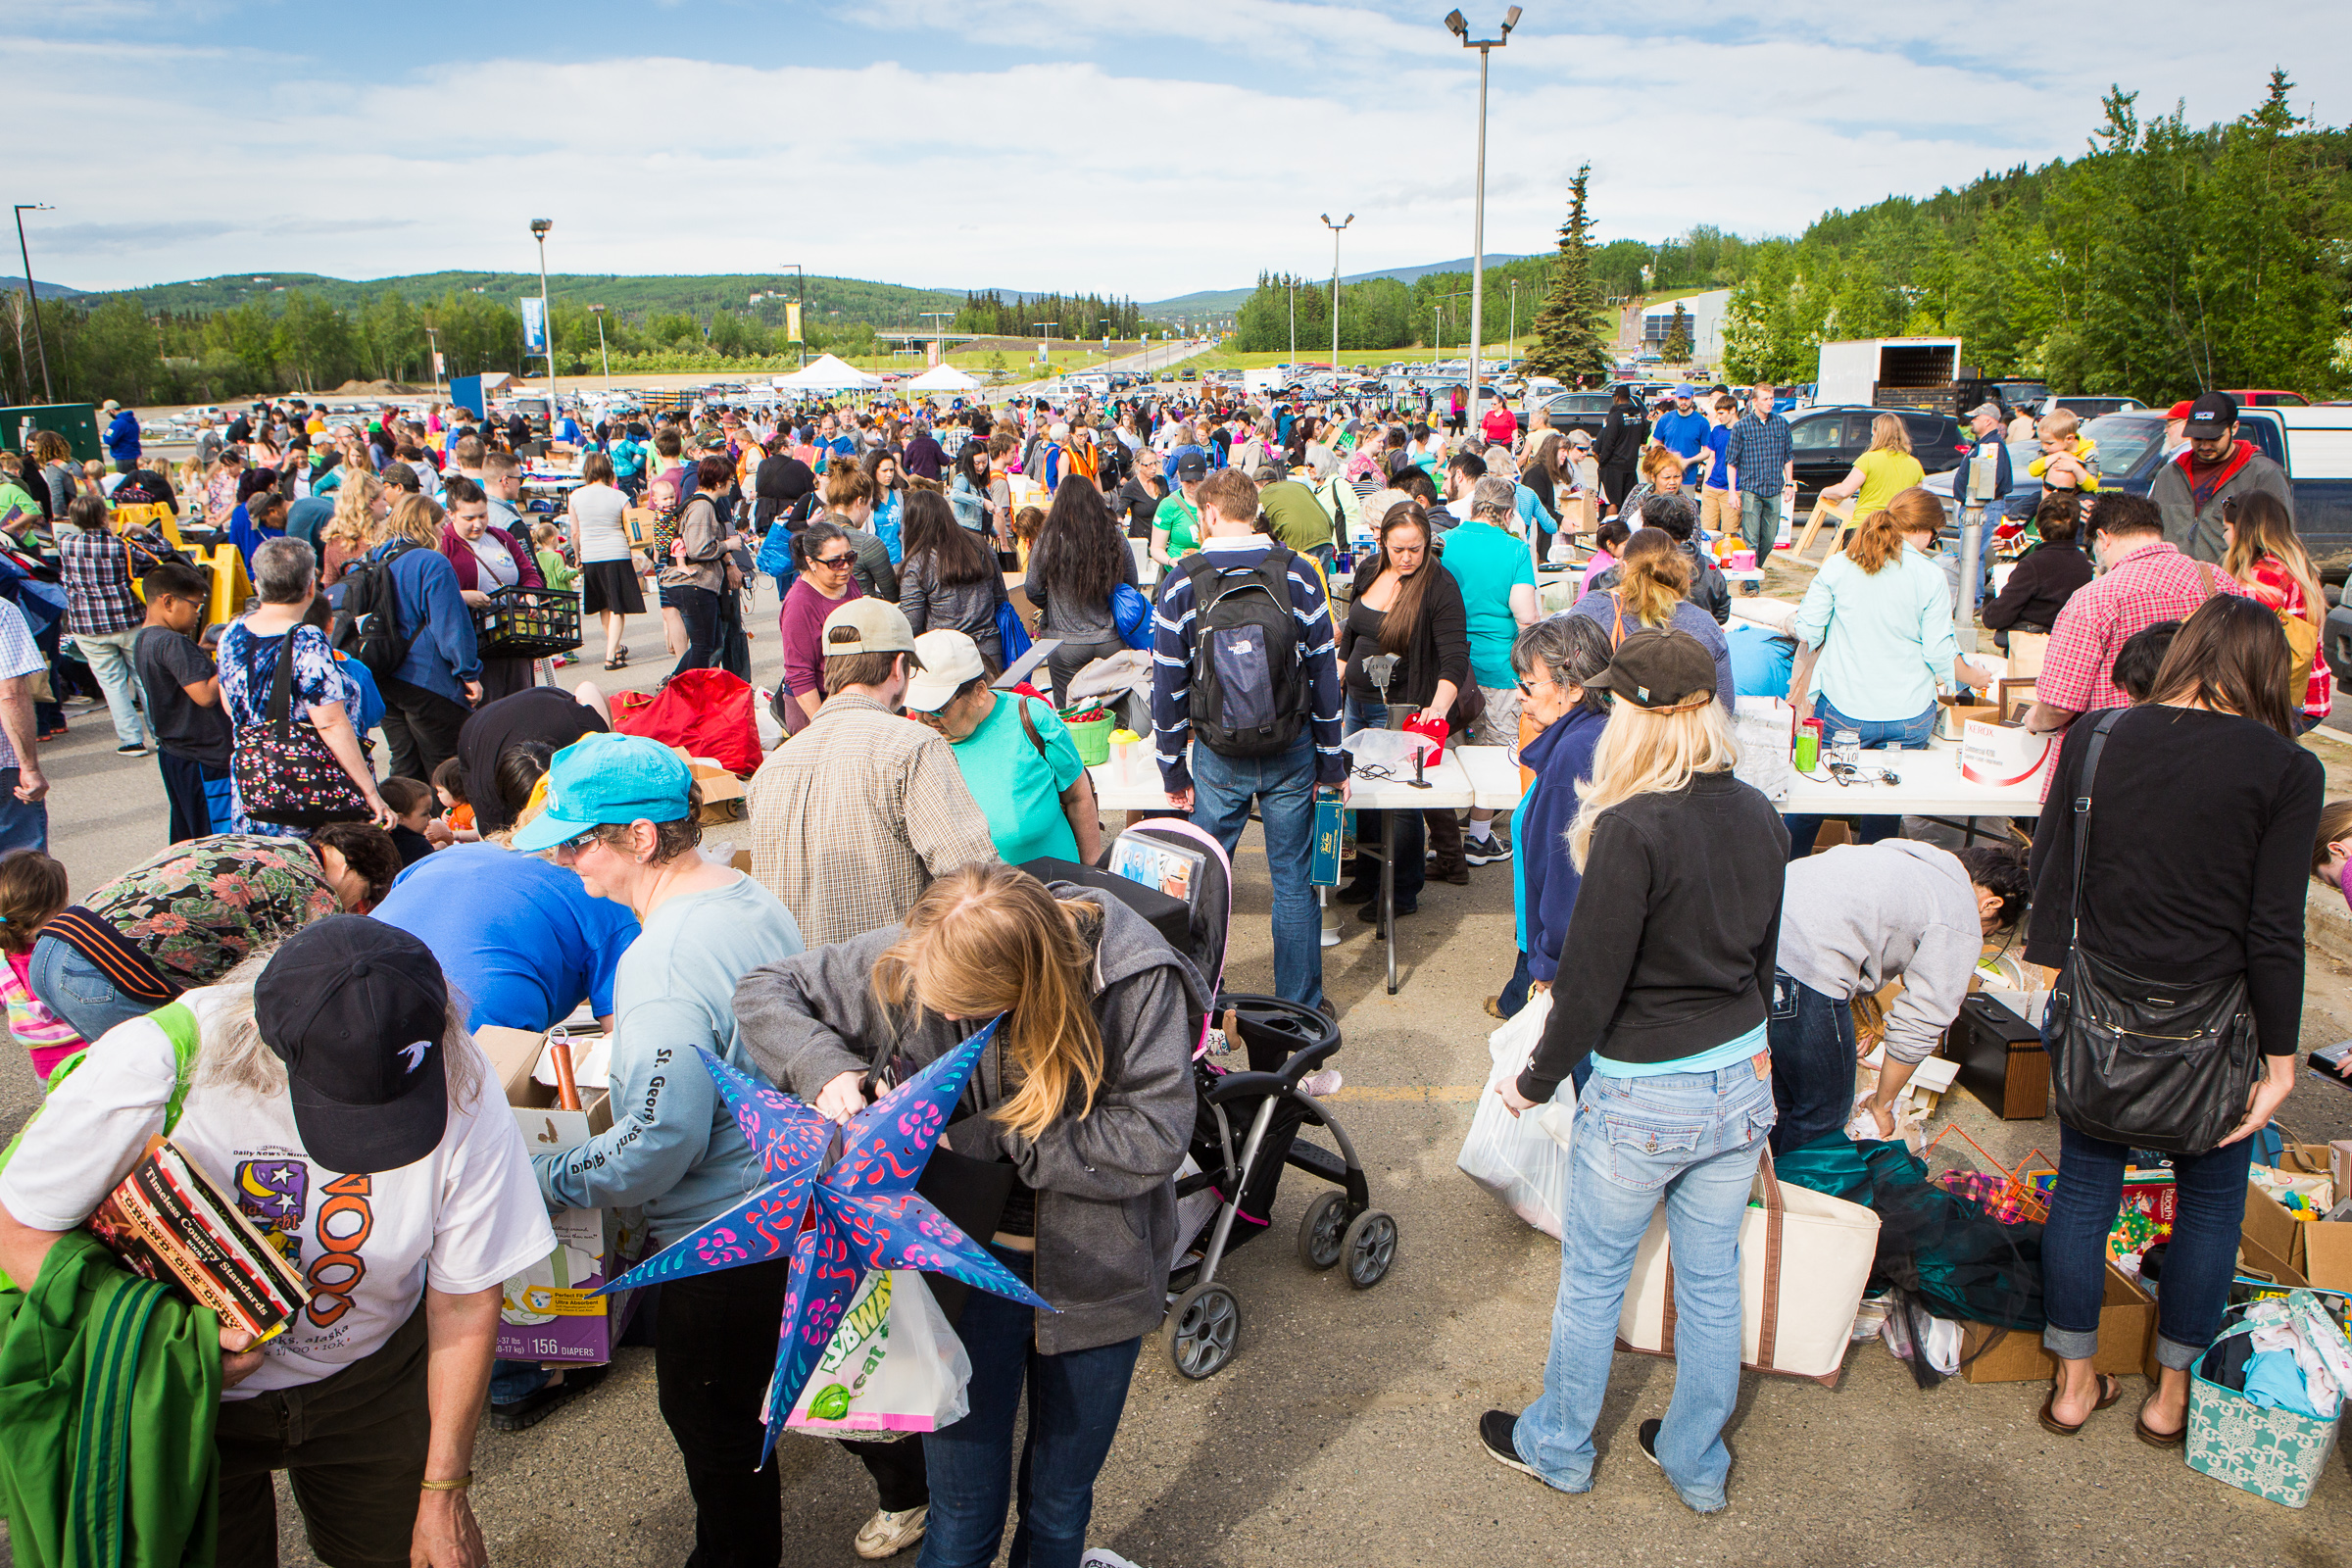 A large crowd of people, many carrying miscellaneous goods, are gathered outdoors in a parking lot with tables and tents.